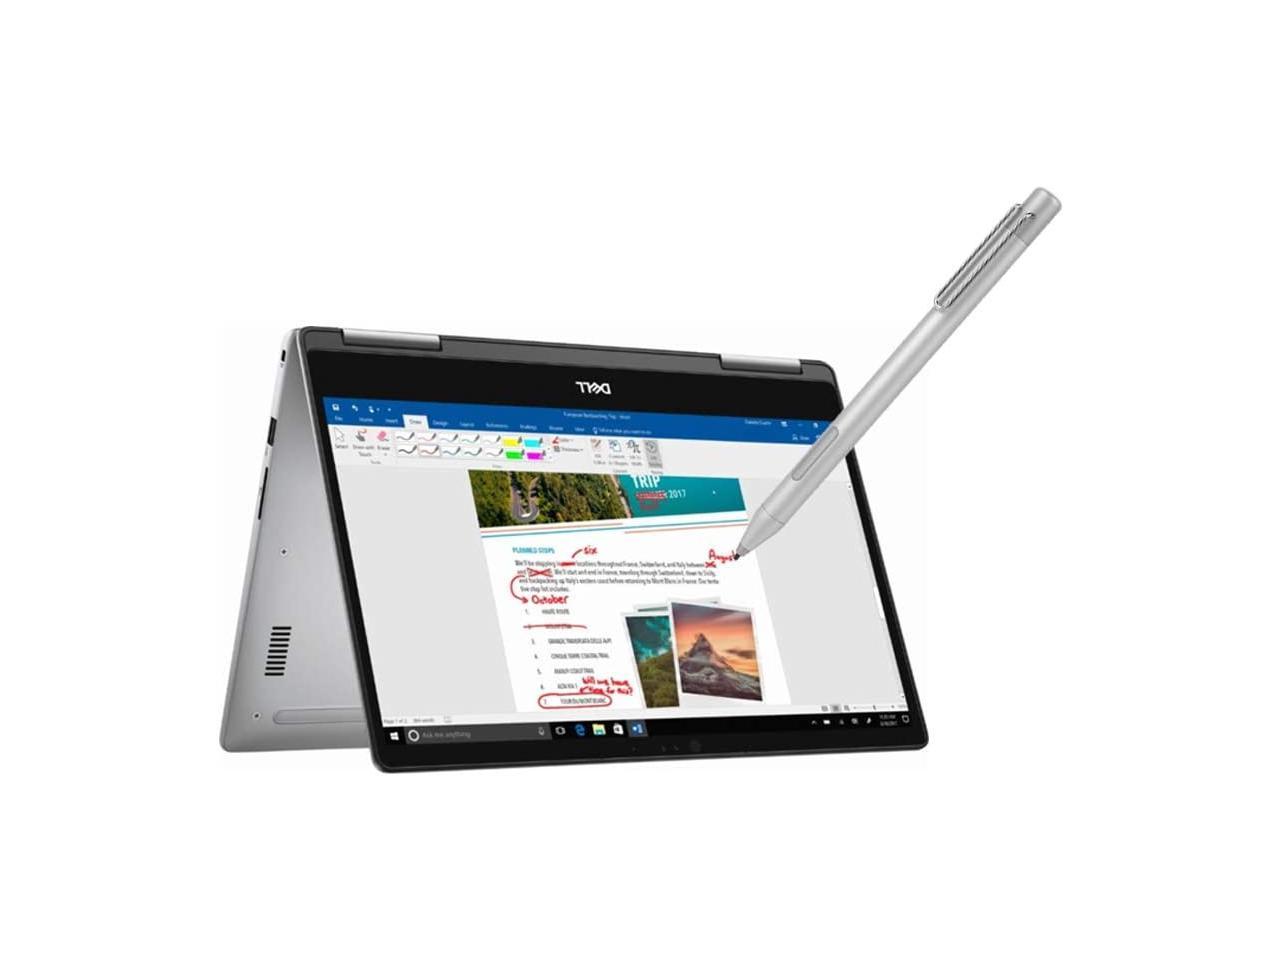 Active Stylus Pen Support For Dell Laptop With Active Pen Compatible Sticker Inspiron 7370 7570 Inspiron 7373 7378 7386 7573 7579 7586 2 In 1 Mpp Inking Mode Metal Silver Newegg Com